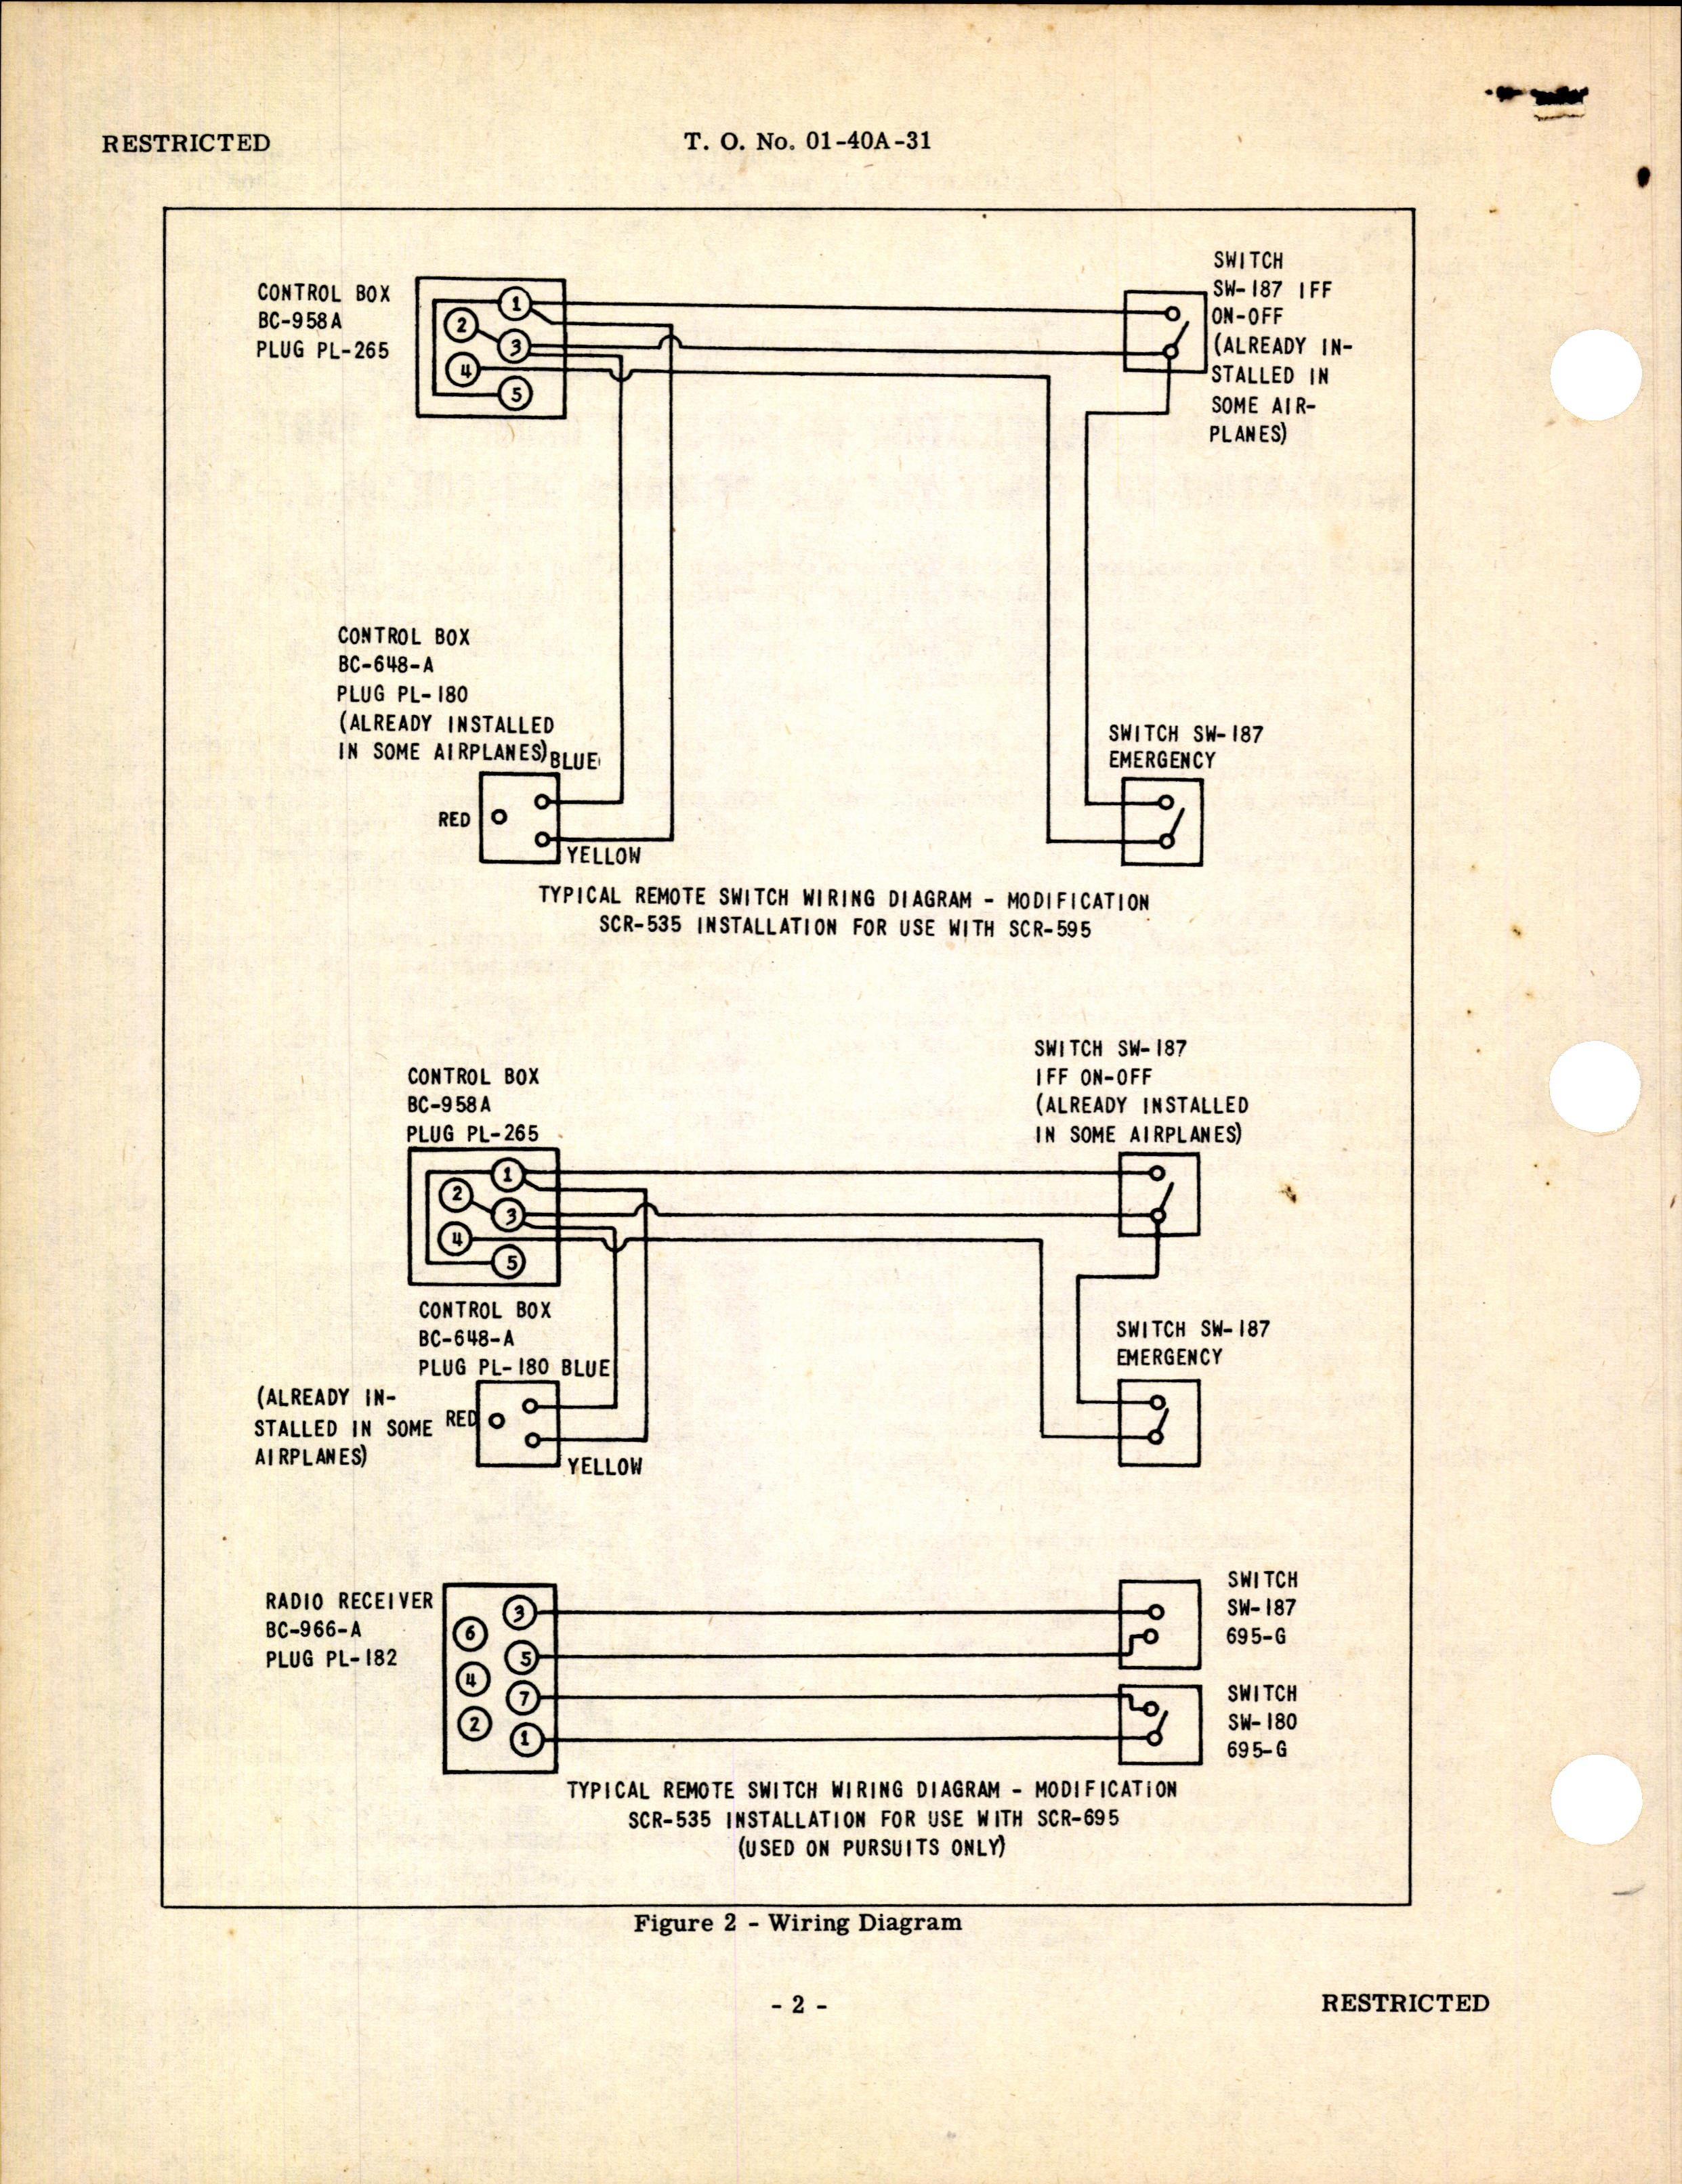 Sample page 2 from AirCorps Library document: Modification of SCR-535-A Group 